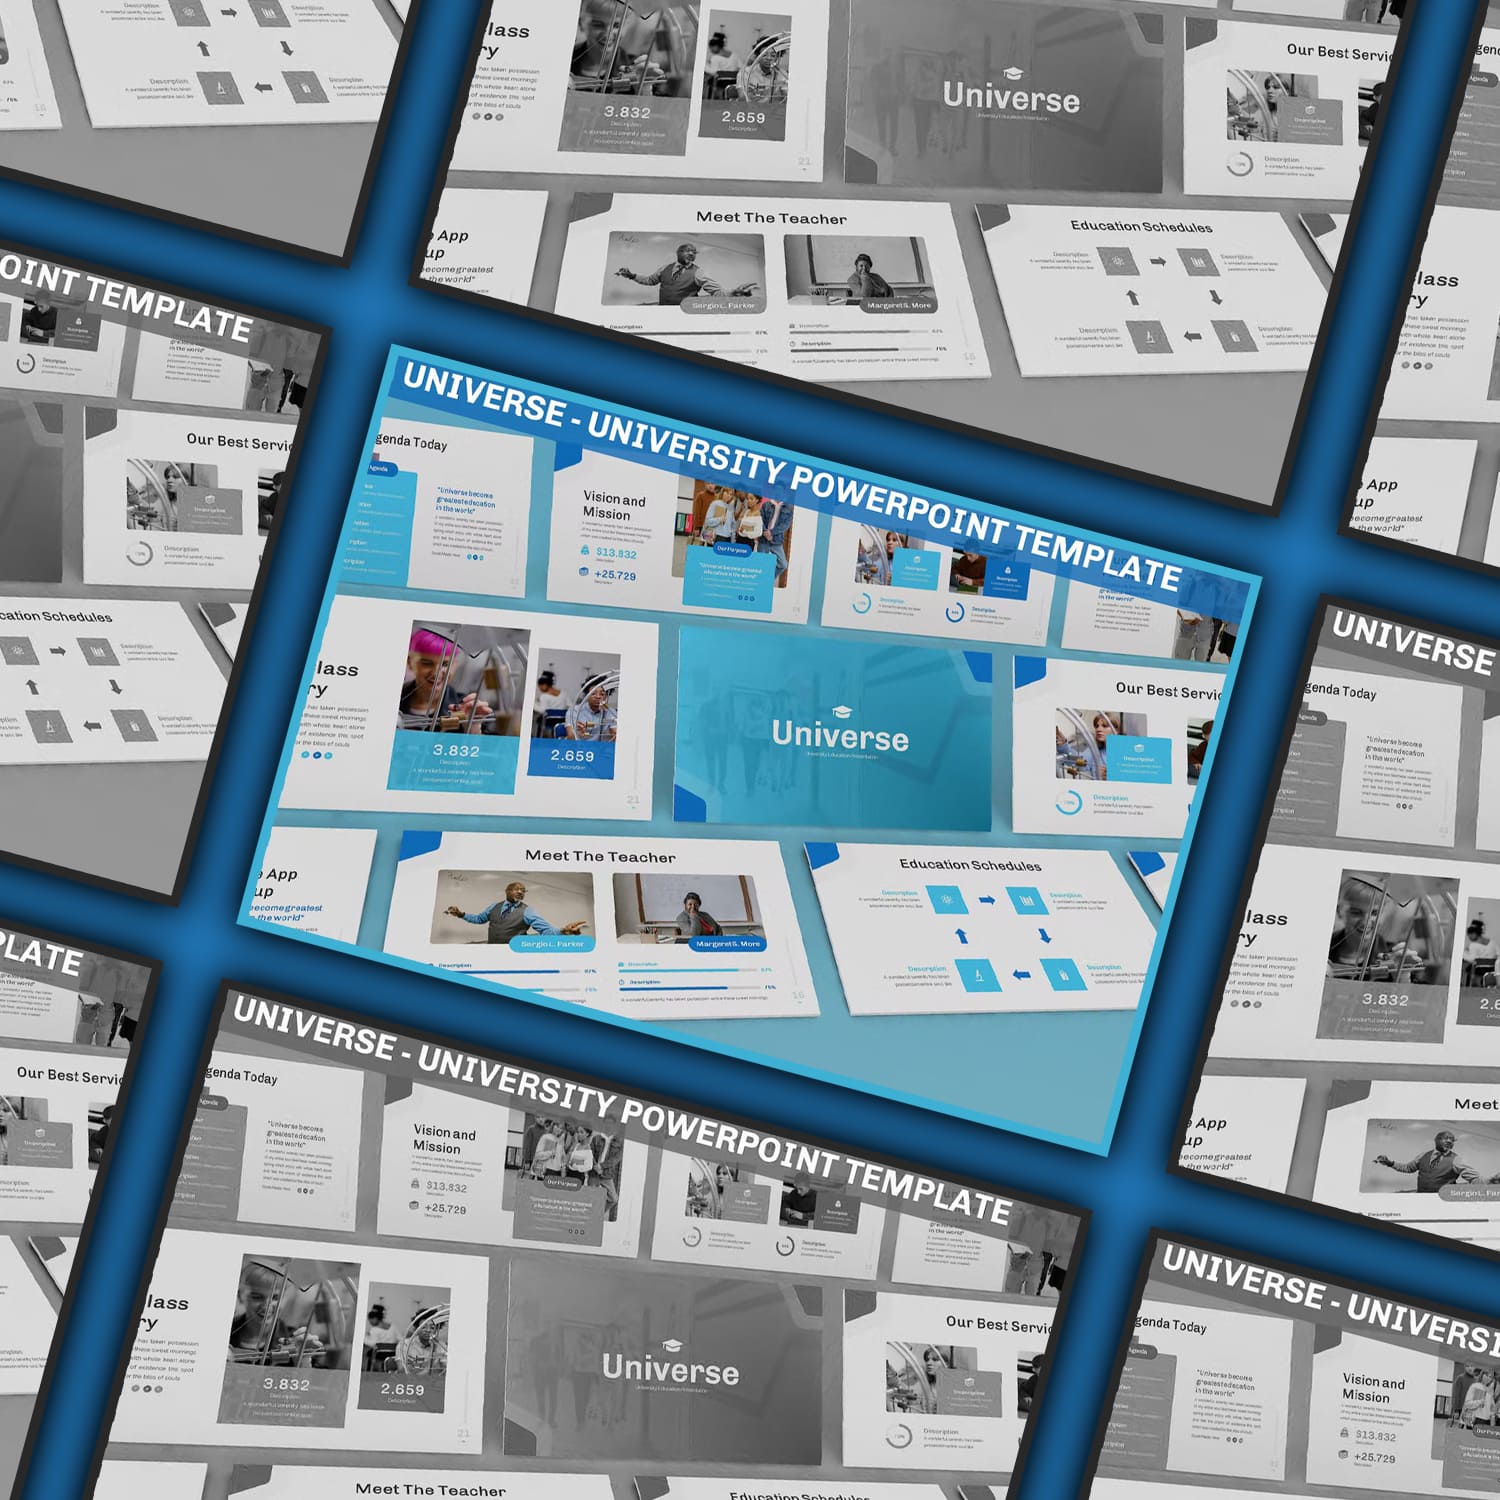 Universe University Powerpoint Template created by SlideFactory.